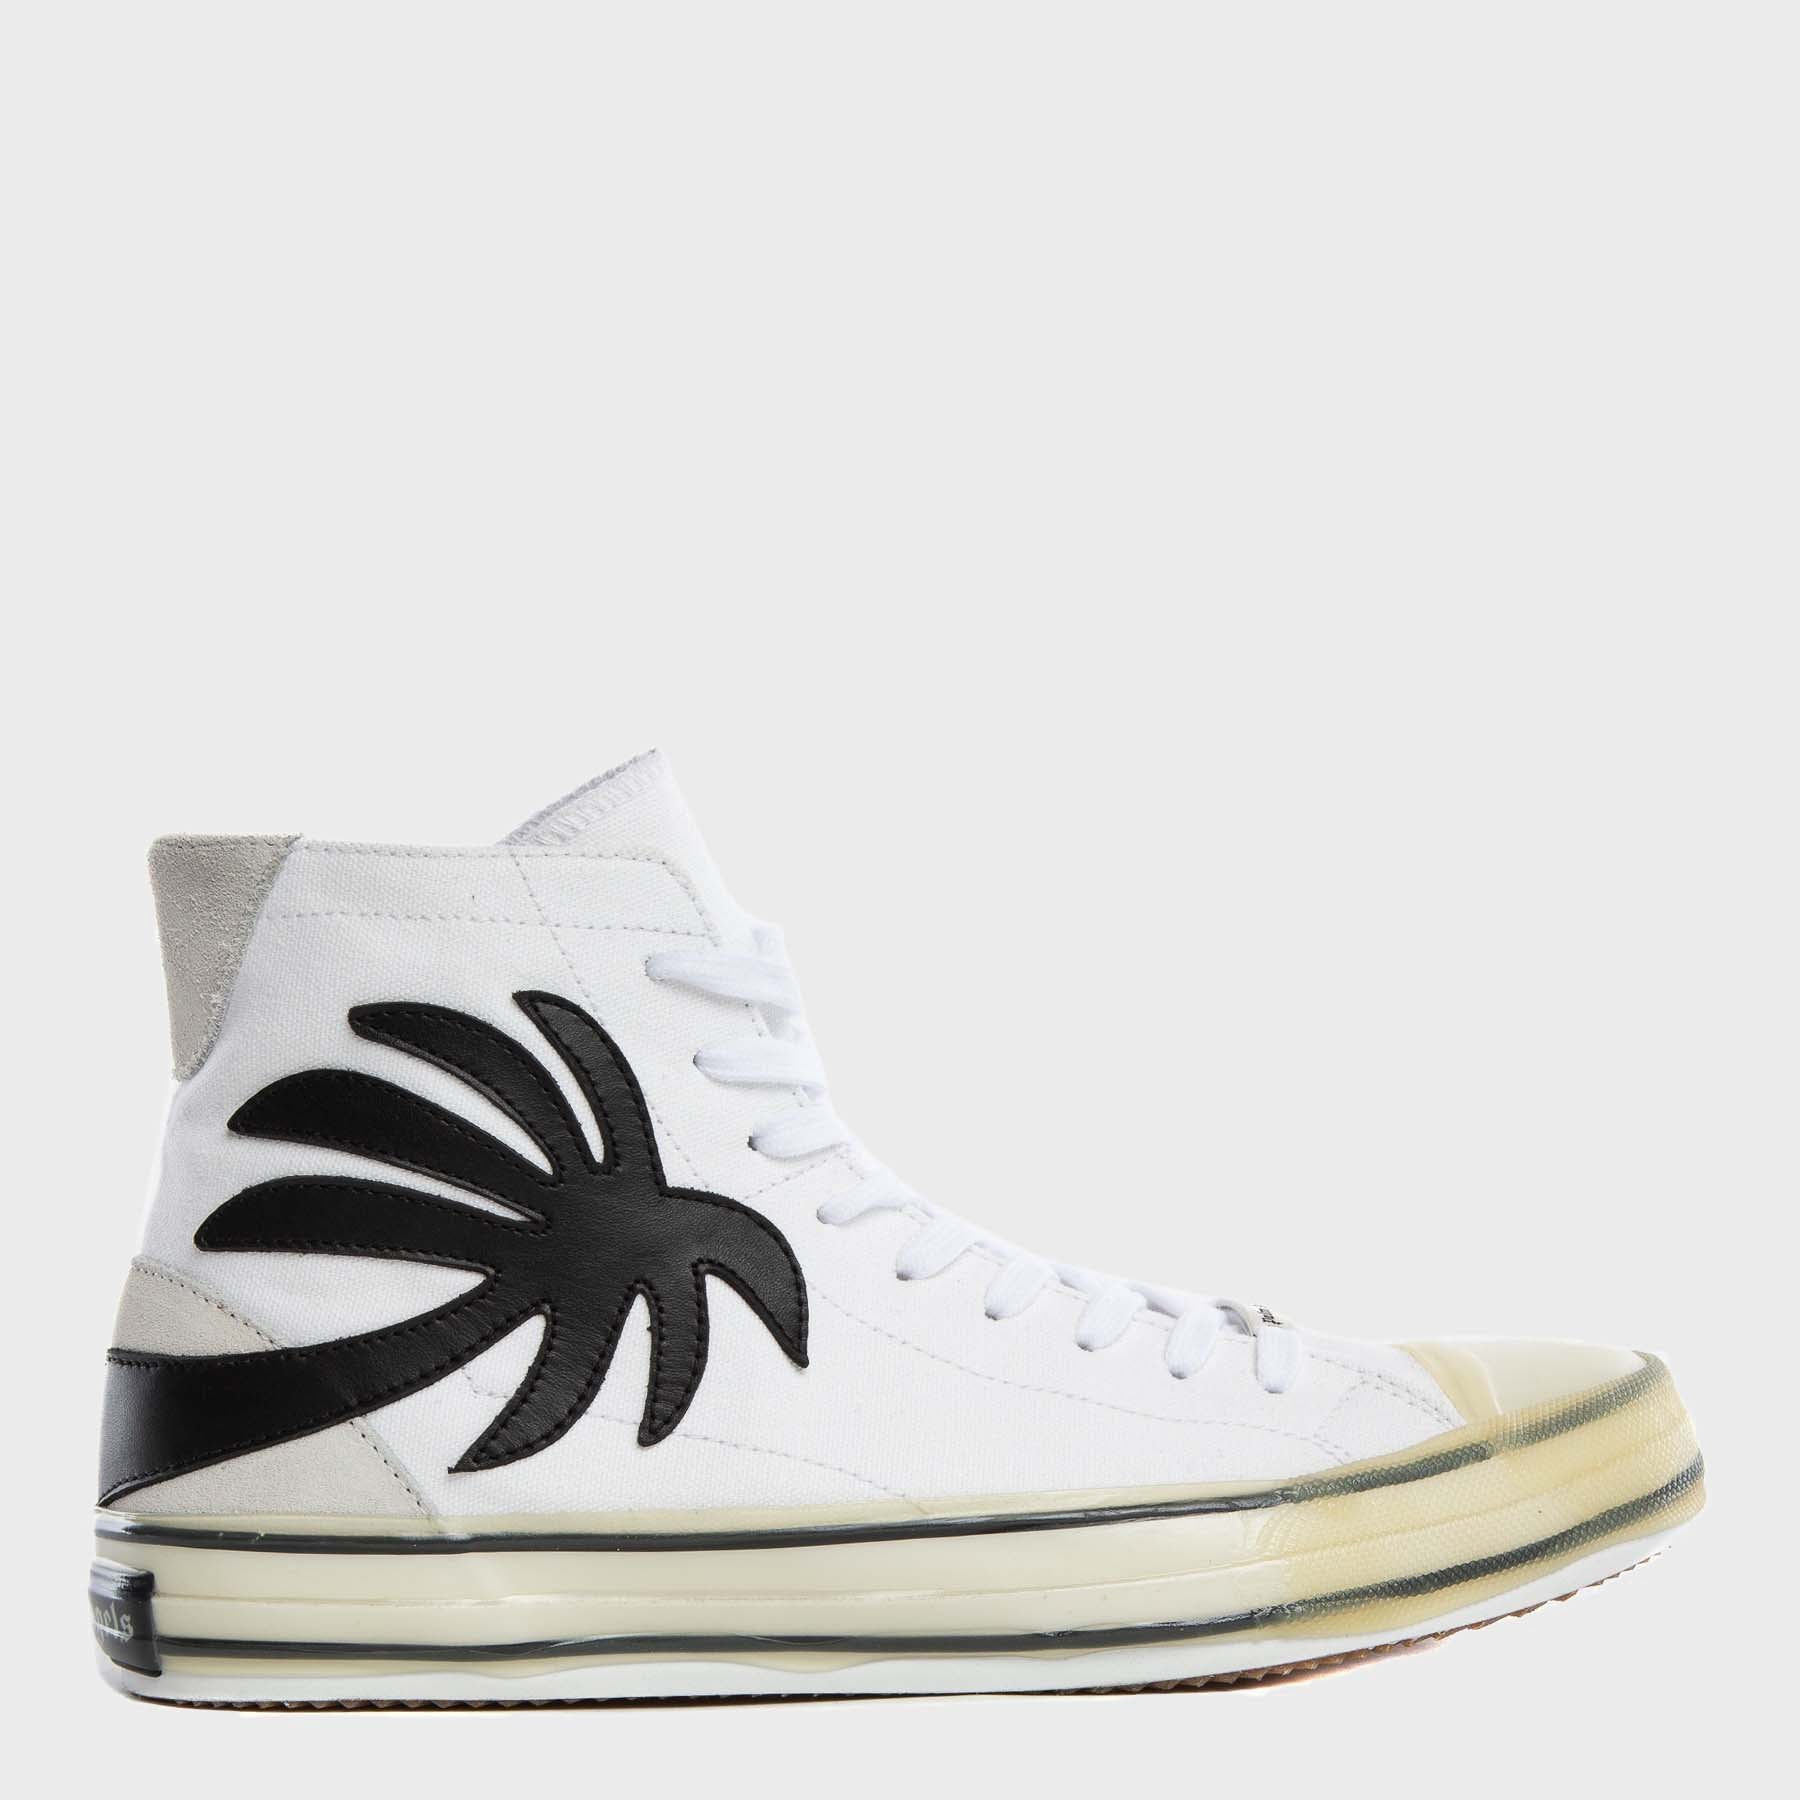 PALM ANGELS | PALM TREE HIGH TOP SNEAKERS